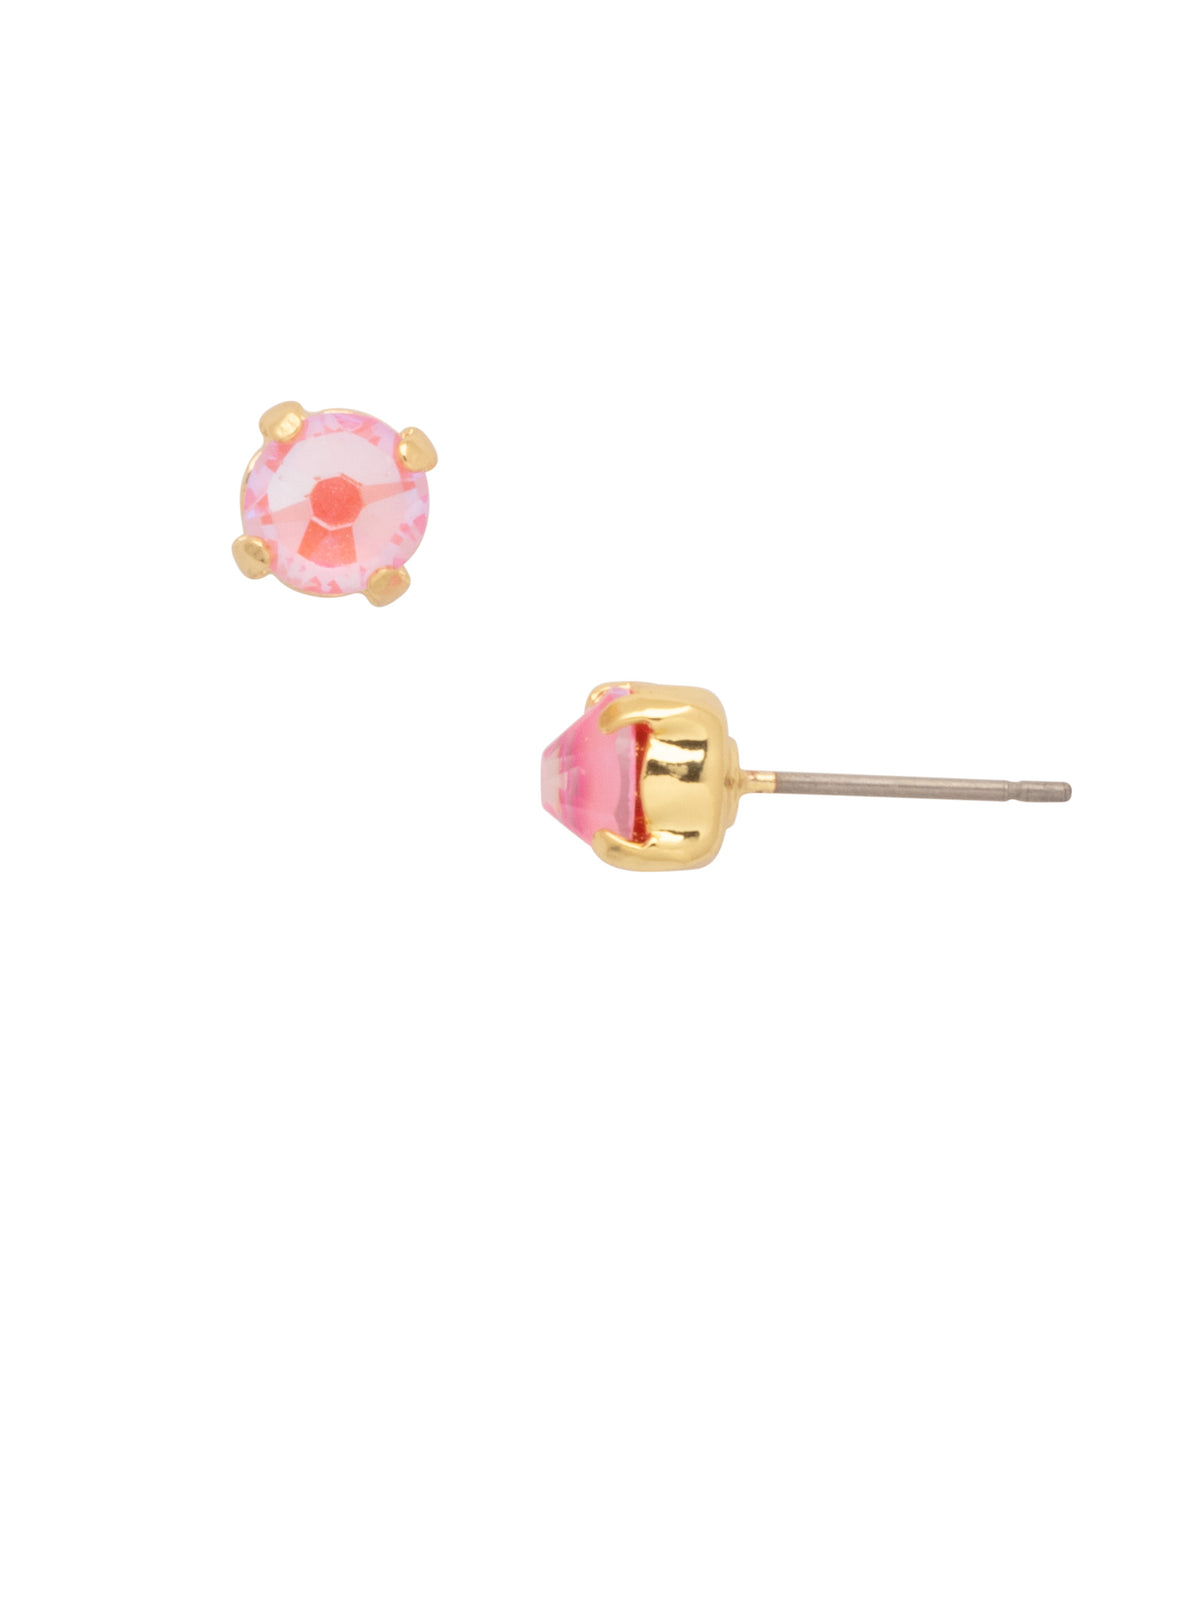 Jayda Stud Earrings - EDN32BGLRD - <p>The Jayda Stud Earrings are the perfect every day wardrobe staple. A round crystal nestles perfectly in a metal plated post with four prongs. </p><p>Need help picking a stud? <a href="https://www.sorrelli.com/blogs/sisterhood/round-stud-earrings-101-a-rundown-of-sizes-styles-and-sparkle">Check out our size guide!</a> From Sorrelli's Light Rose Delite collection in our Bright Gold-tone finish.</p>